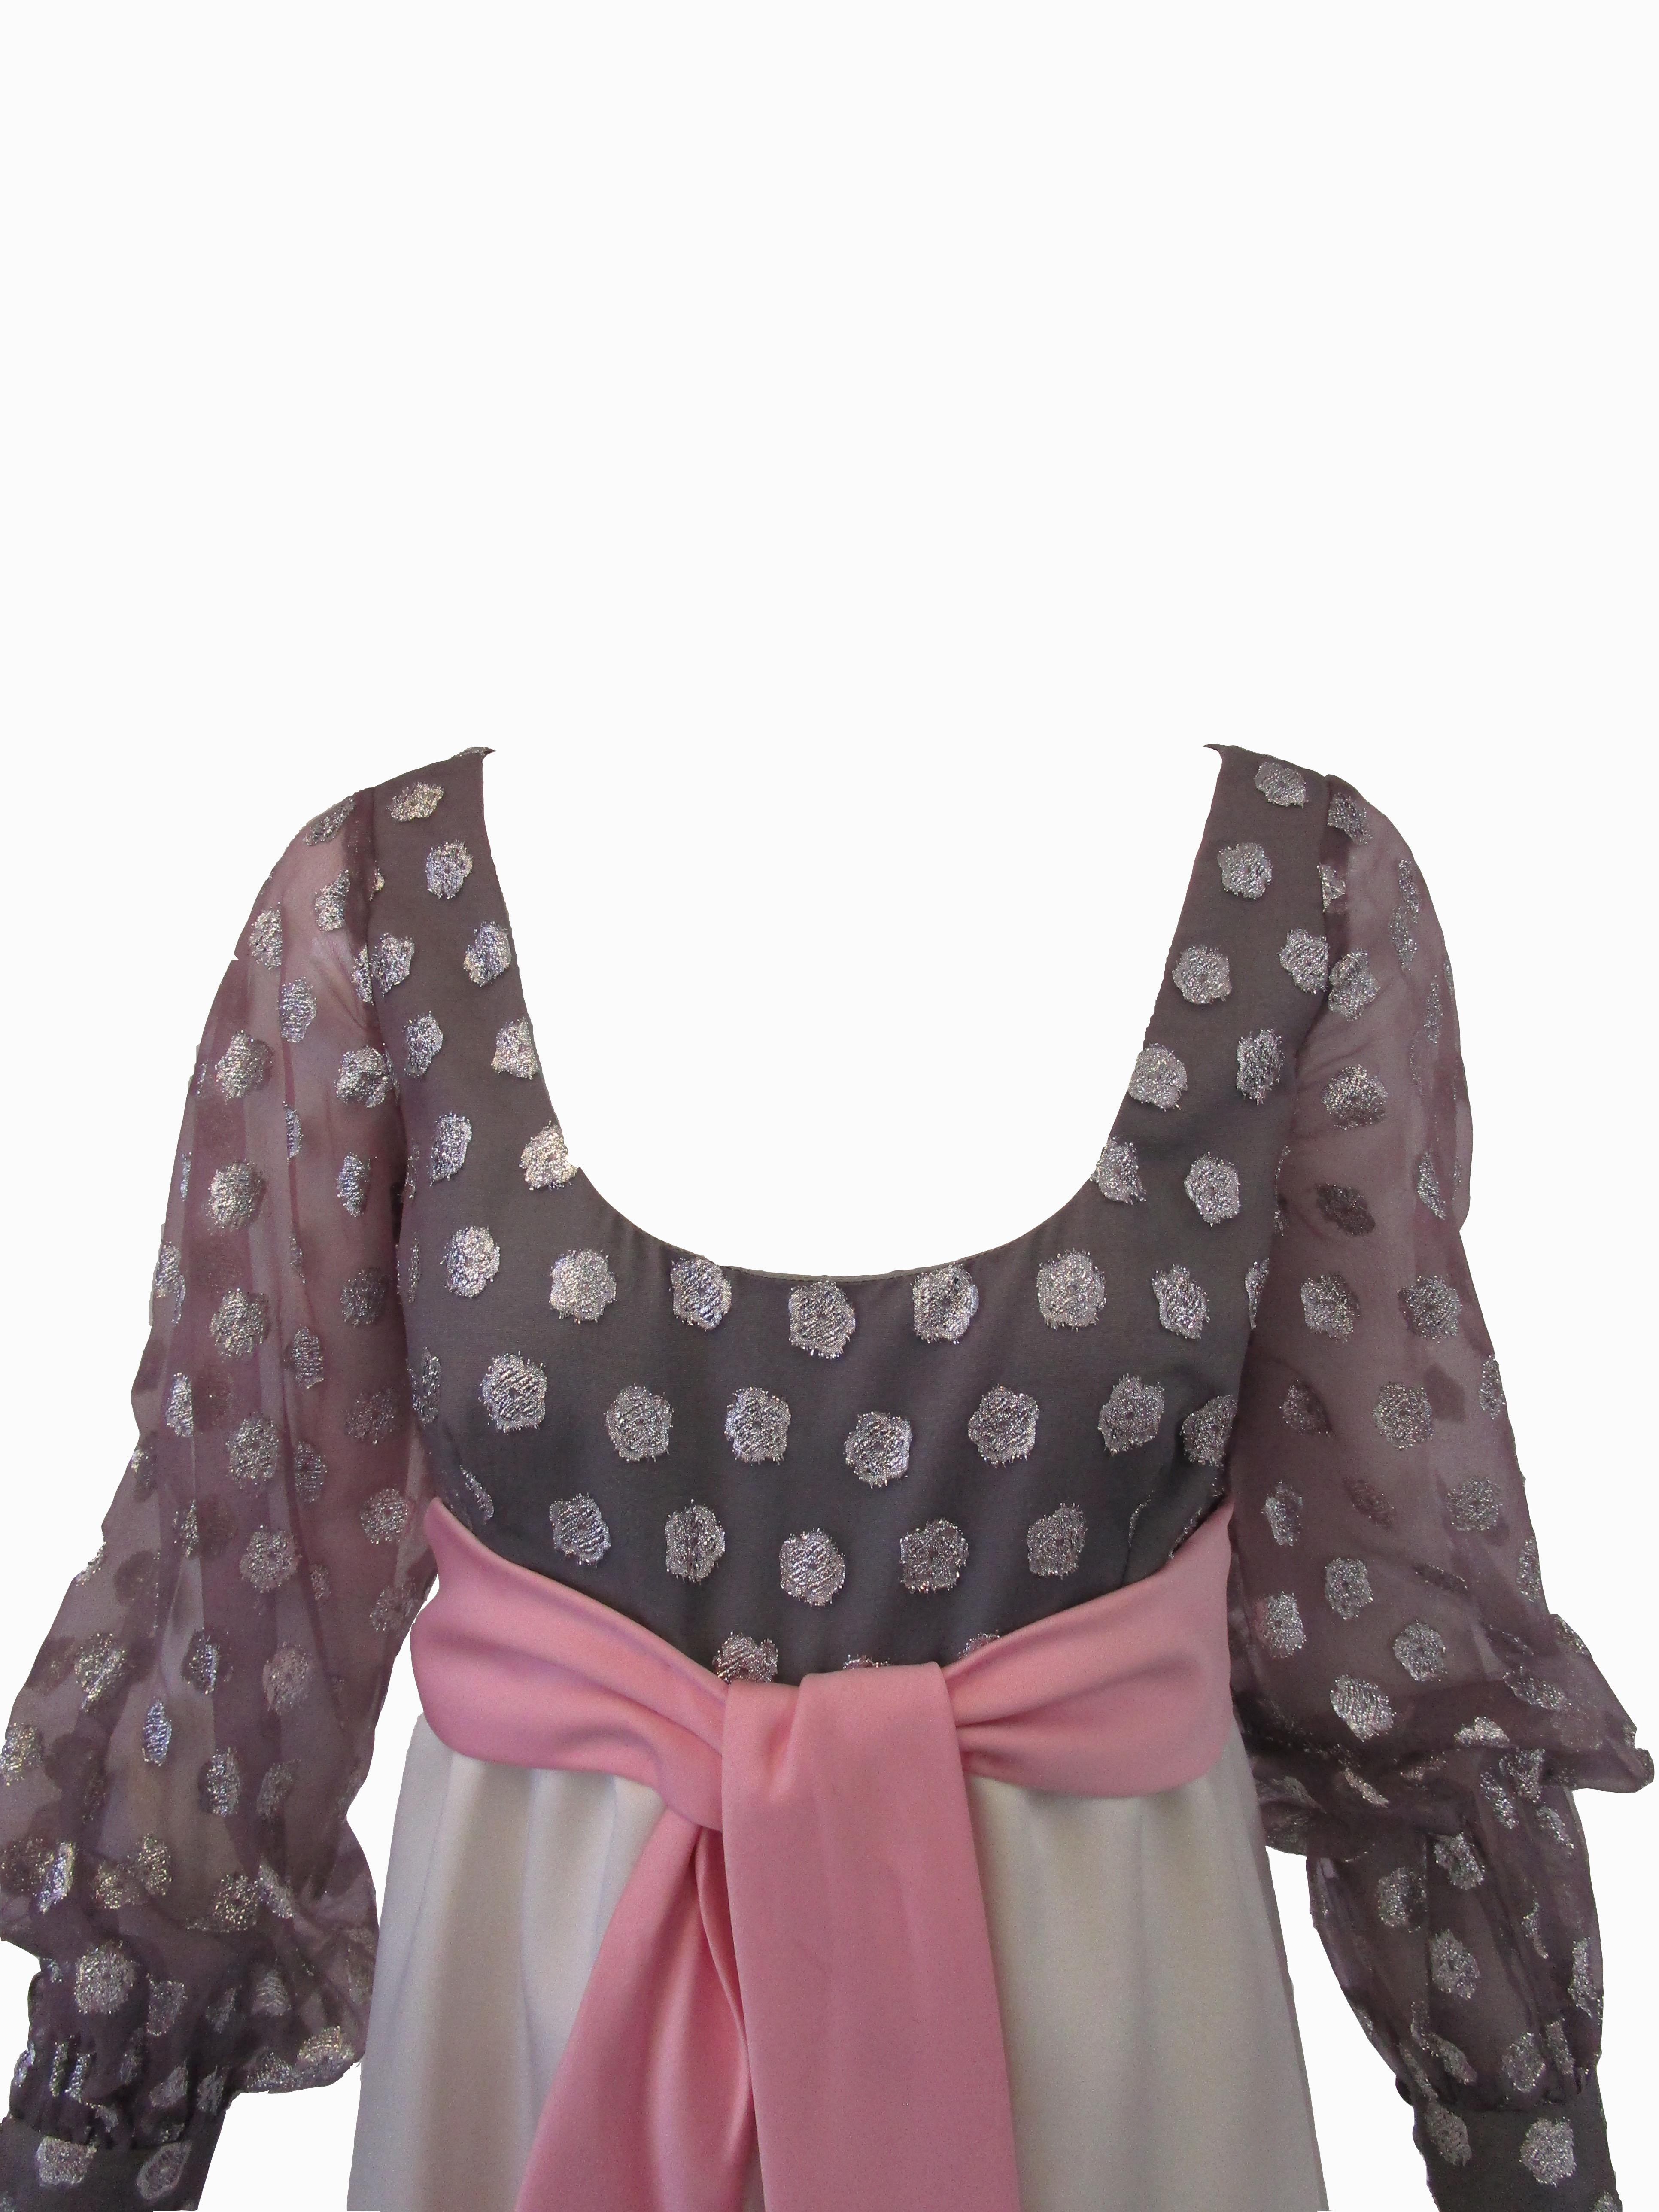 Women's 1960s  Geoffrey Beene Purple, Pink and Cream Silk Gown with Silver Polka Dots  For Sale